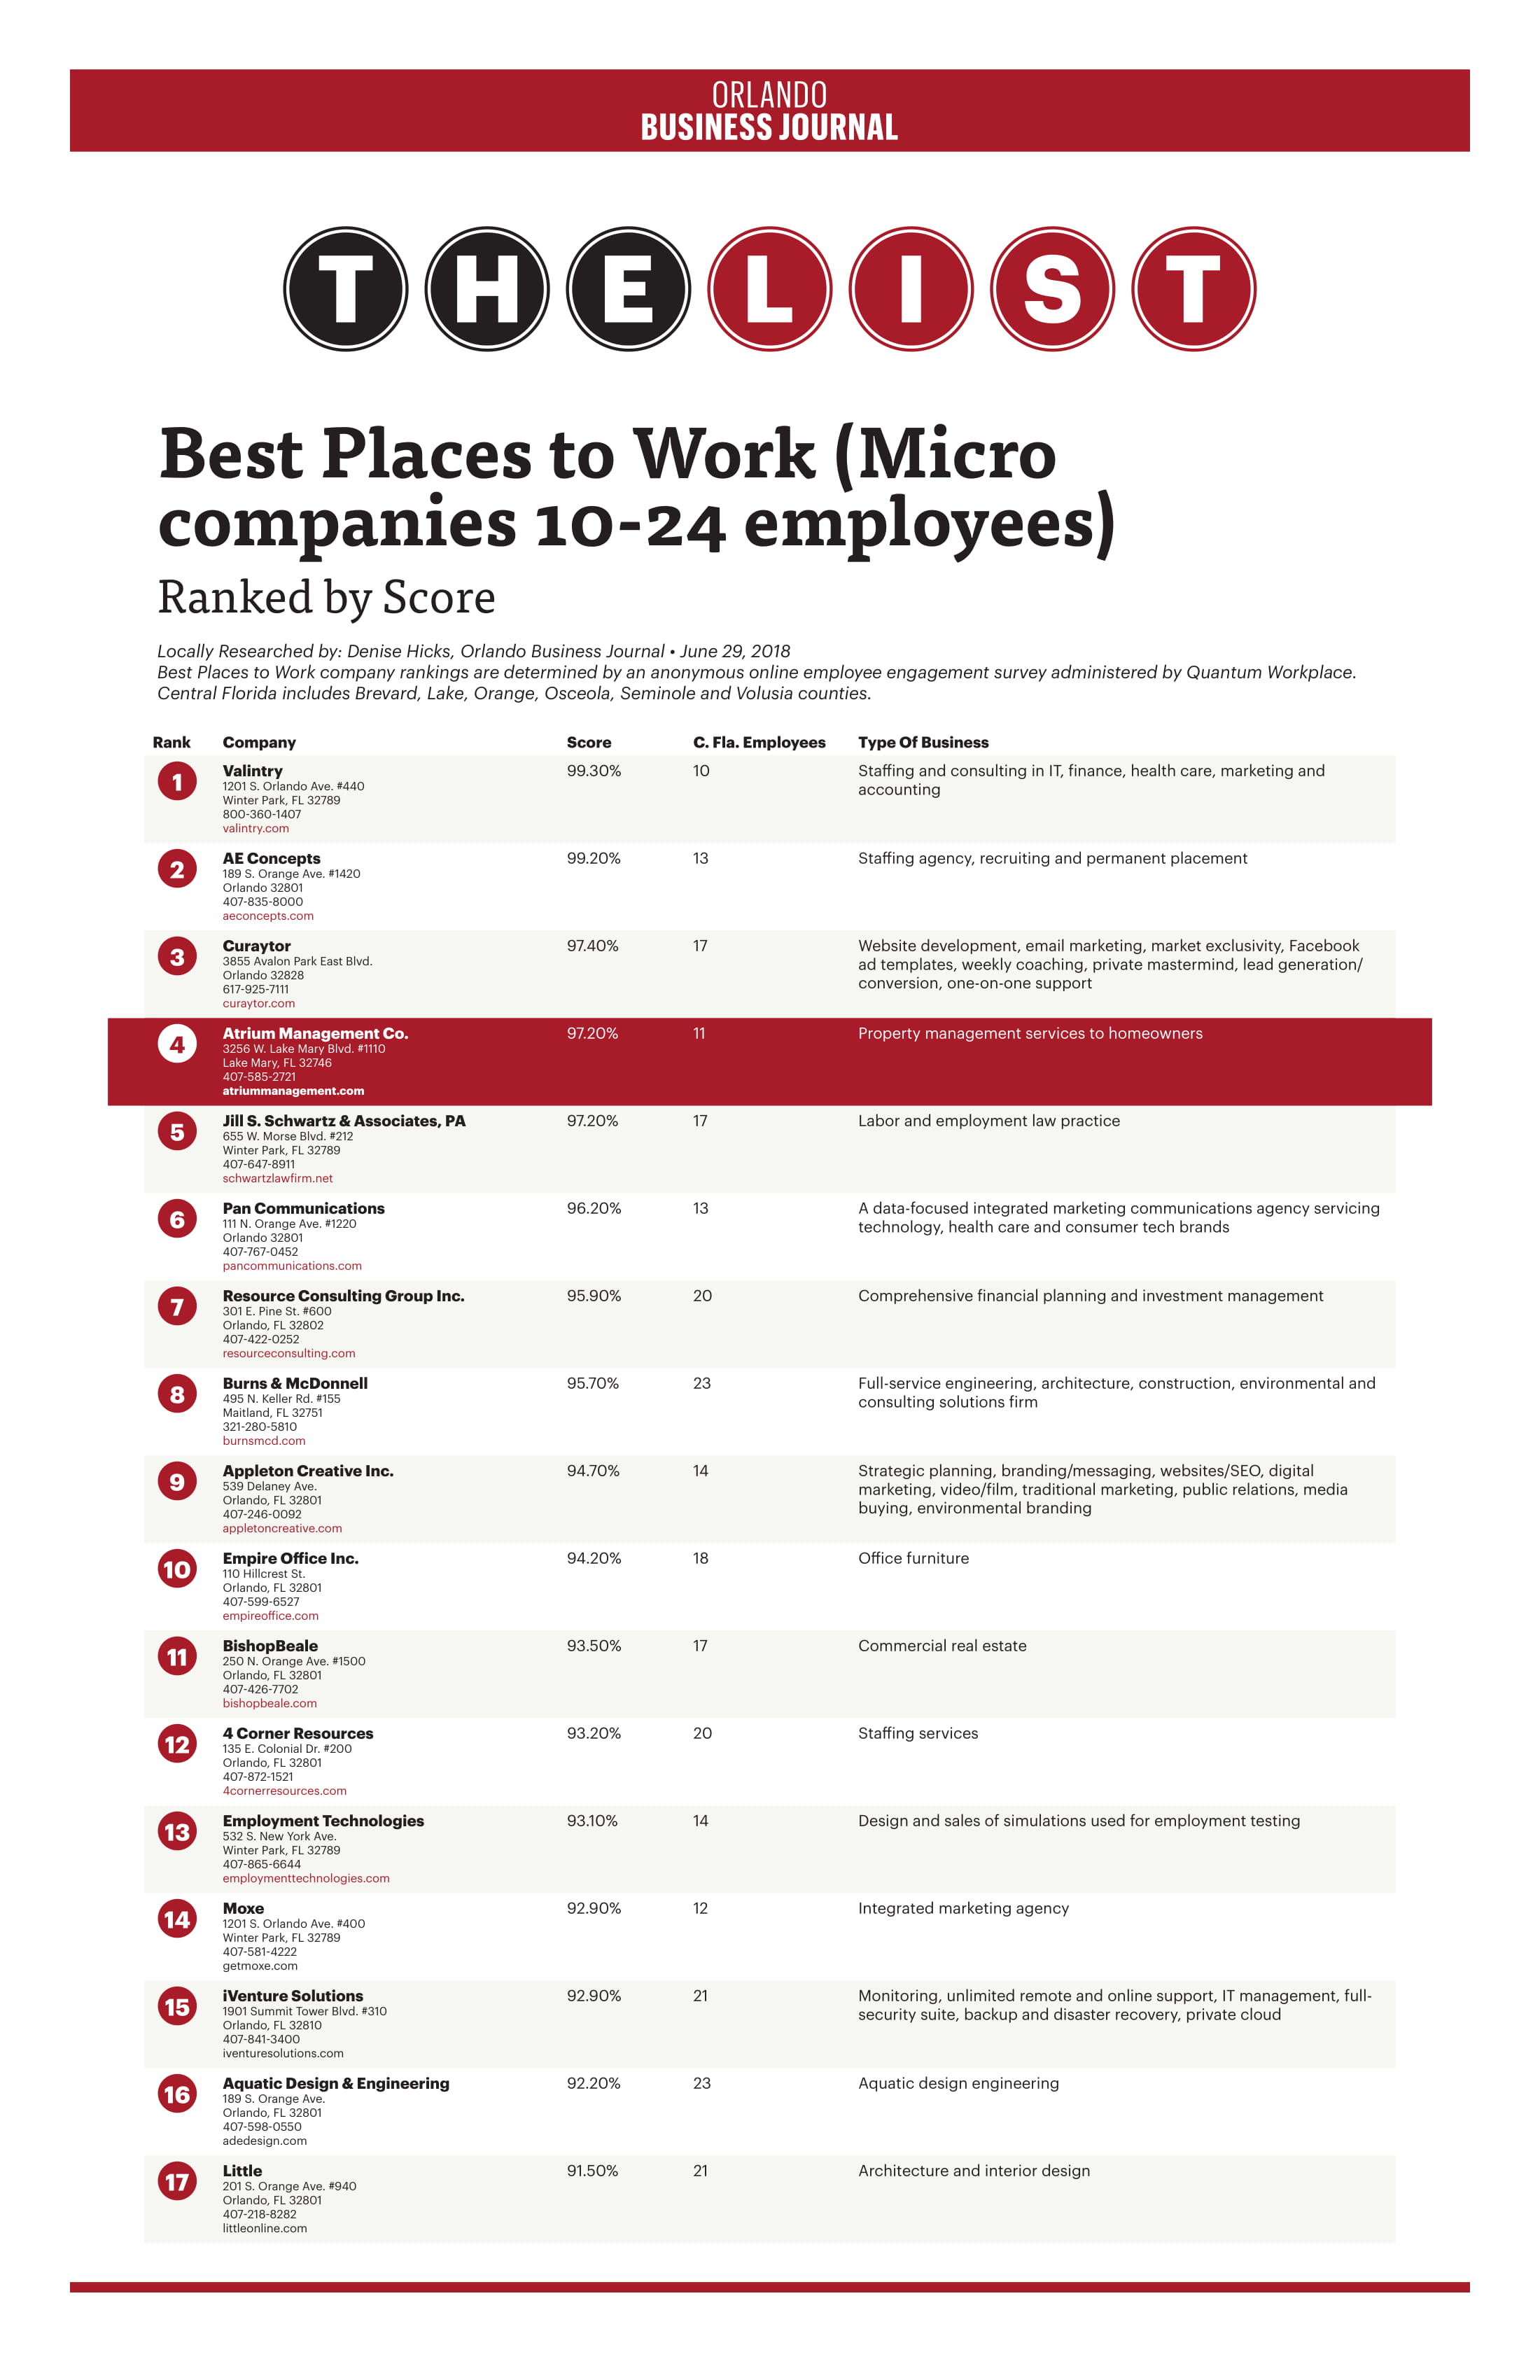 The List: Best Places to Work (Micro companies 10-24 employees)